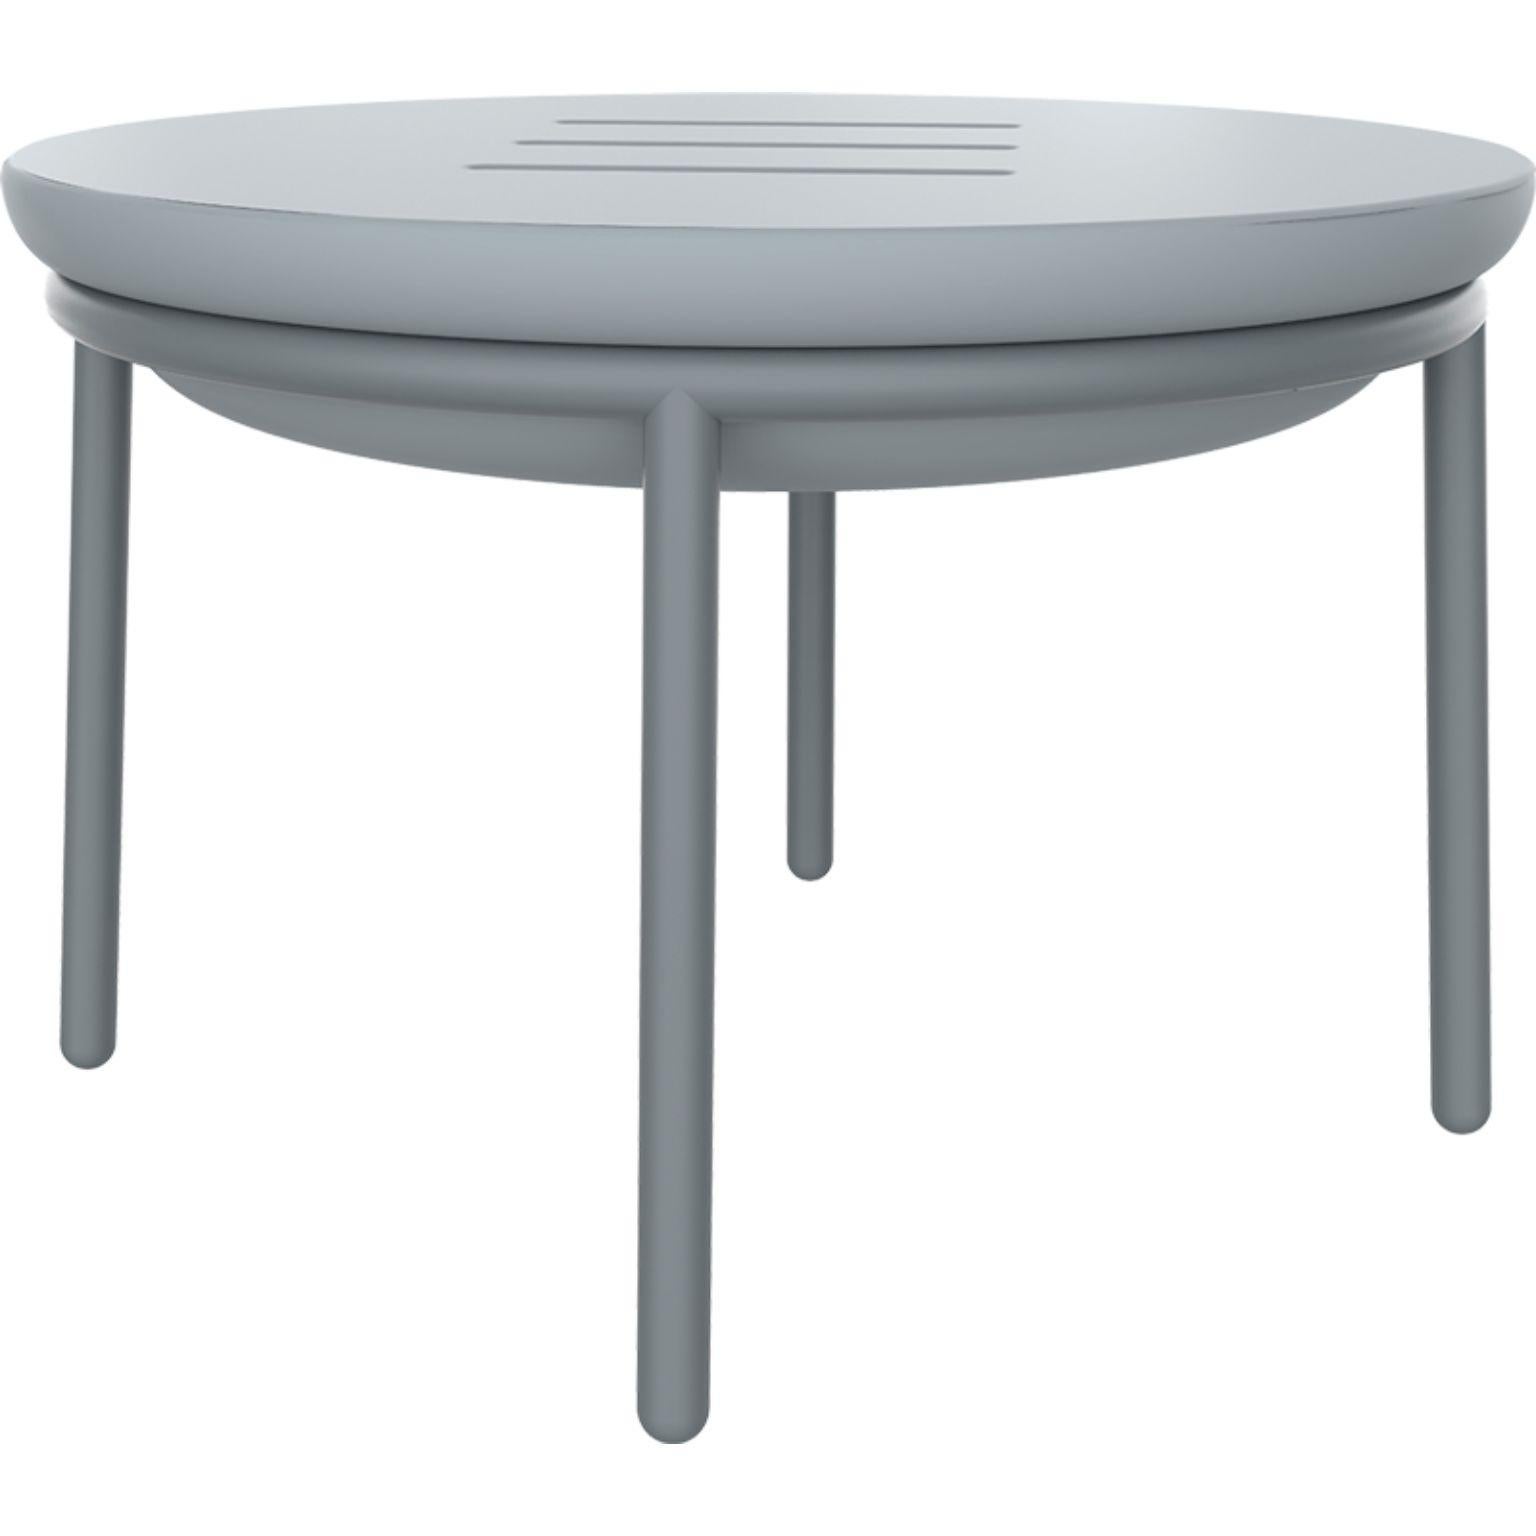 Lace grey 60 low table by MOWEE
Dimensions: Ø60 x H41 cm
Material: Polyethylene and stainless steel.
Weight: 6.2 kg.
Also available in different colors and finishes (lacquered).

Lace is a collection of furniture made by rotomoulding. Its